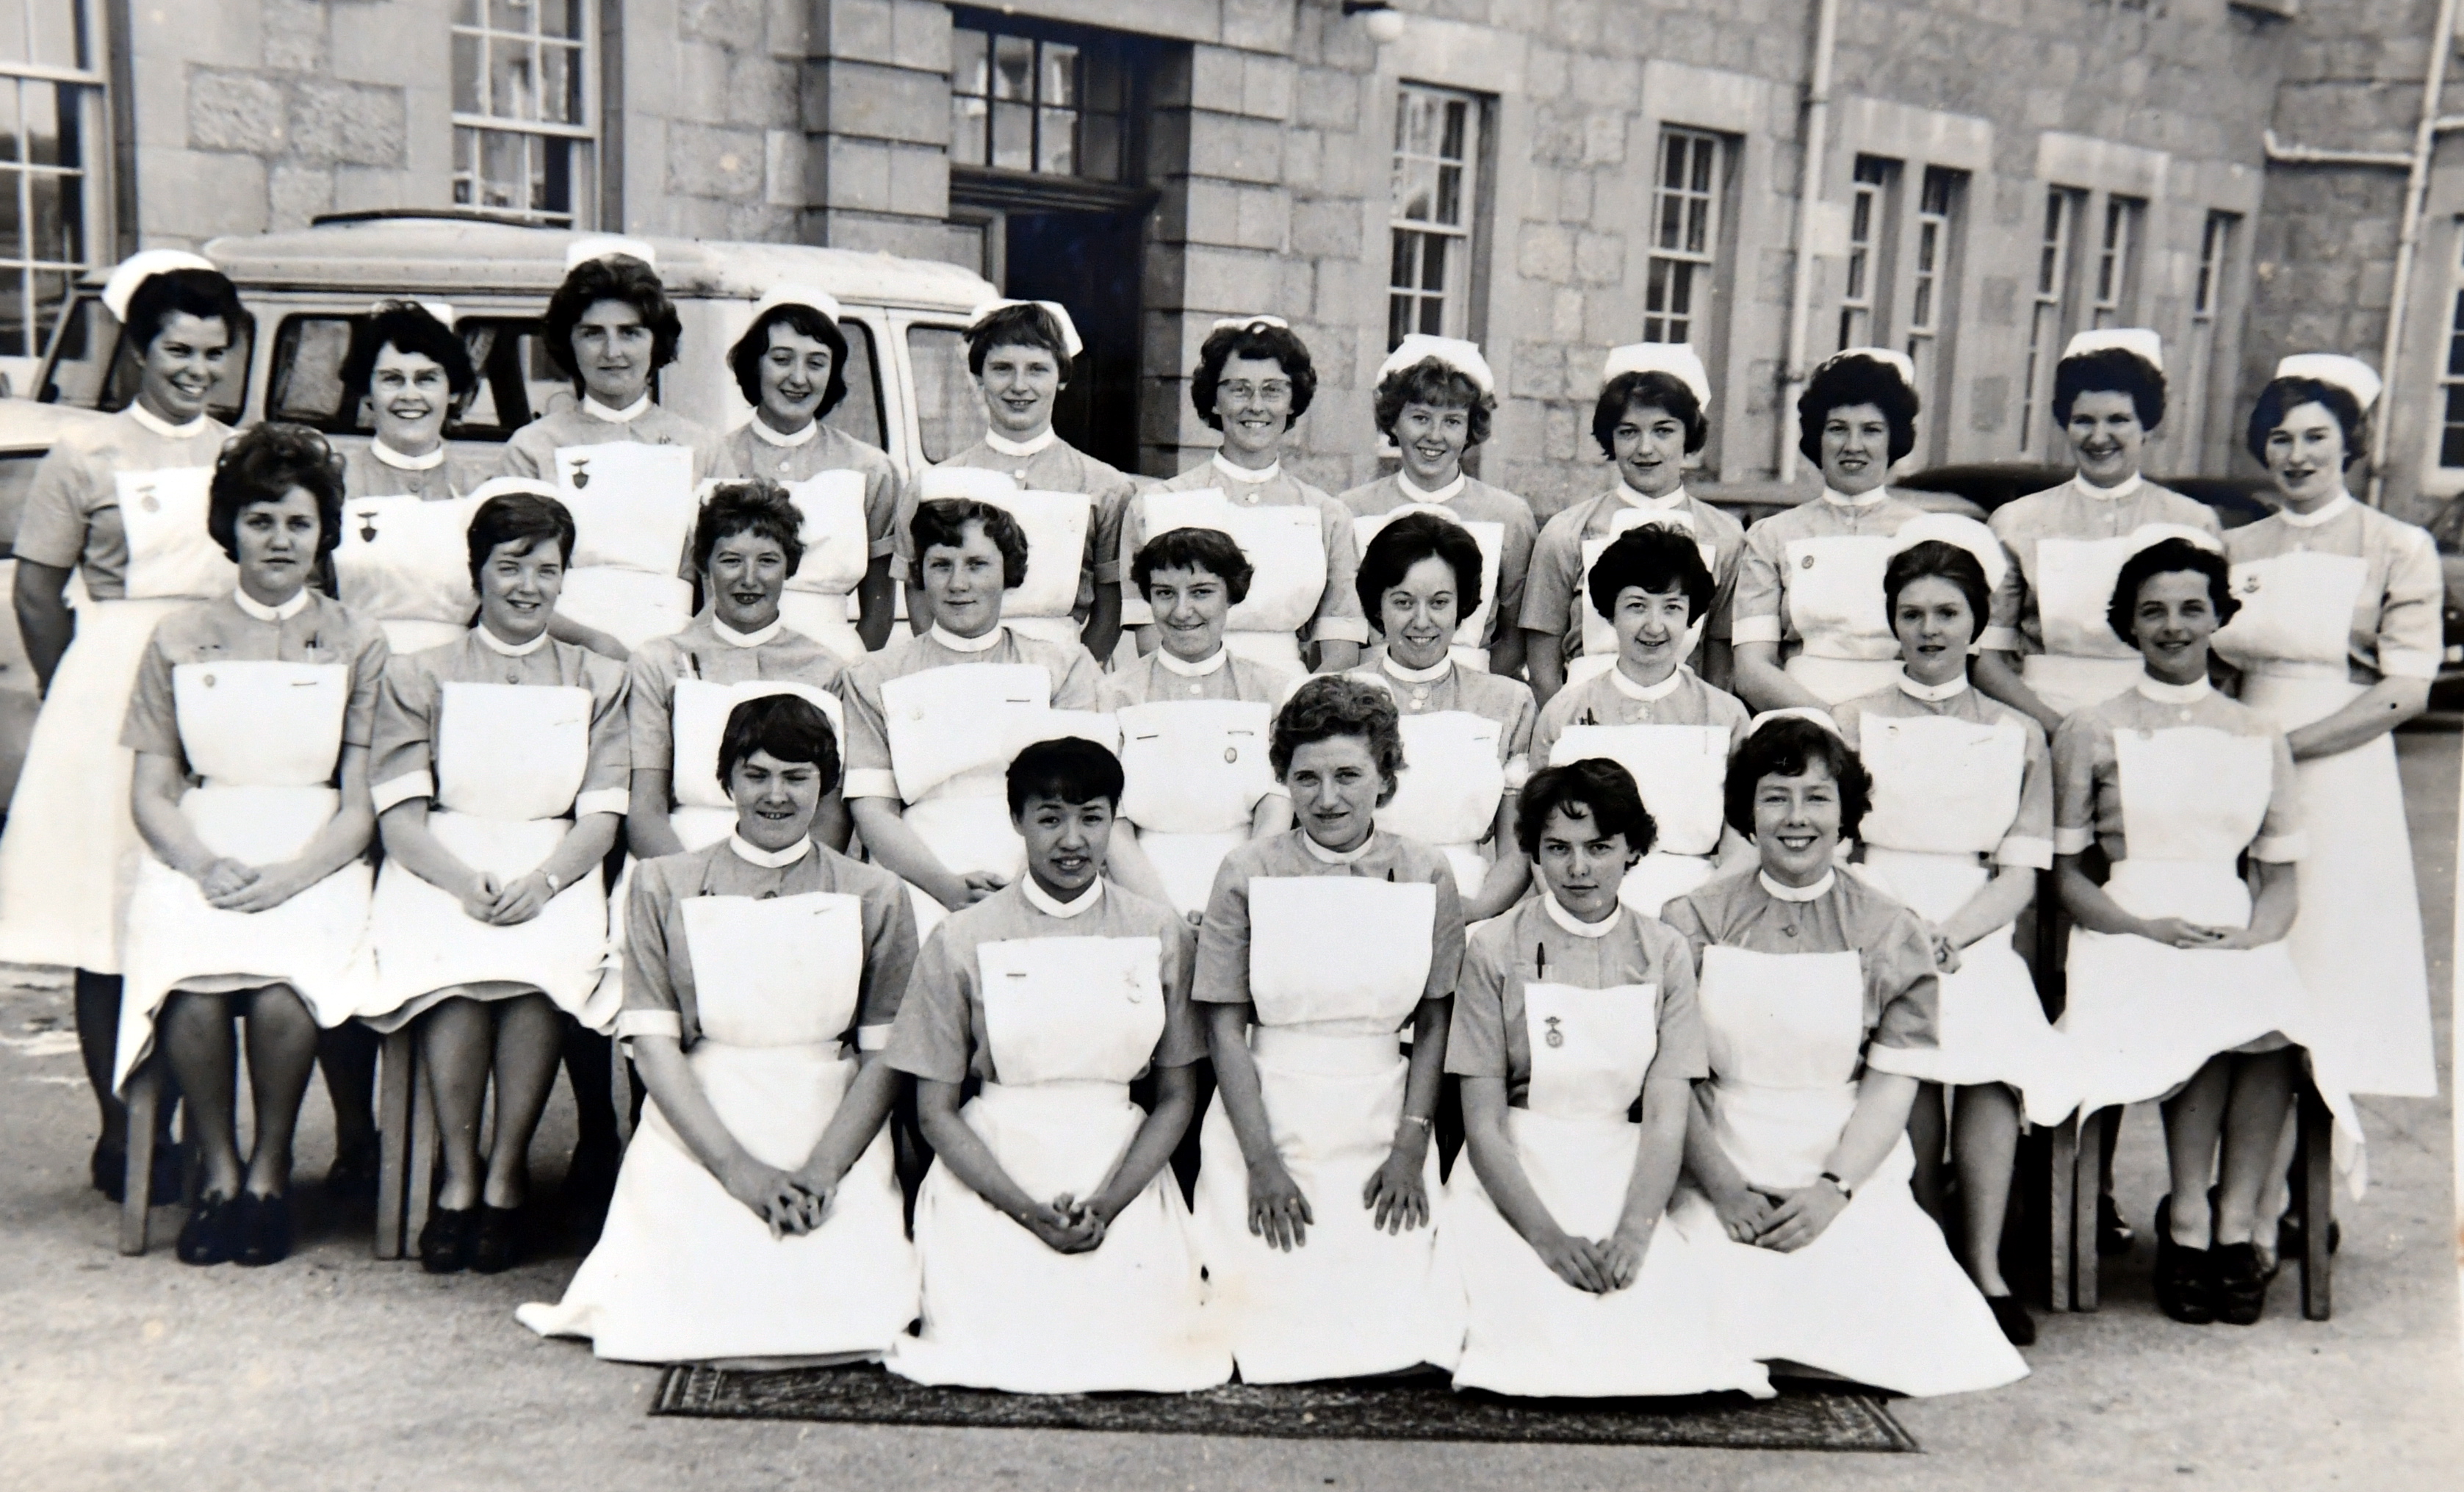 Former nurses from Aberdeen Royal Infirmary celebrate 60 year since they began their training.